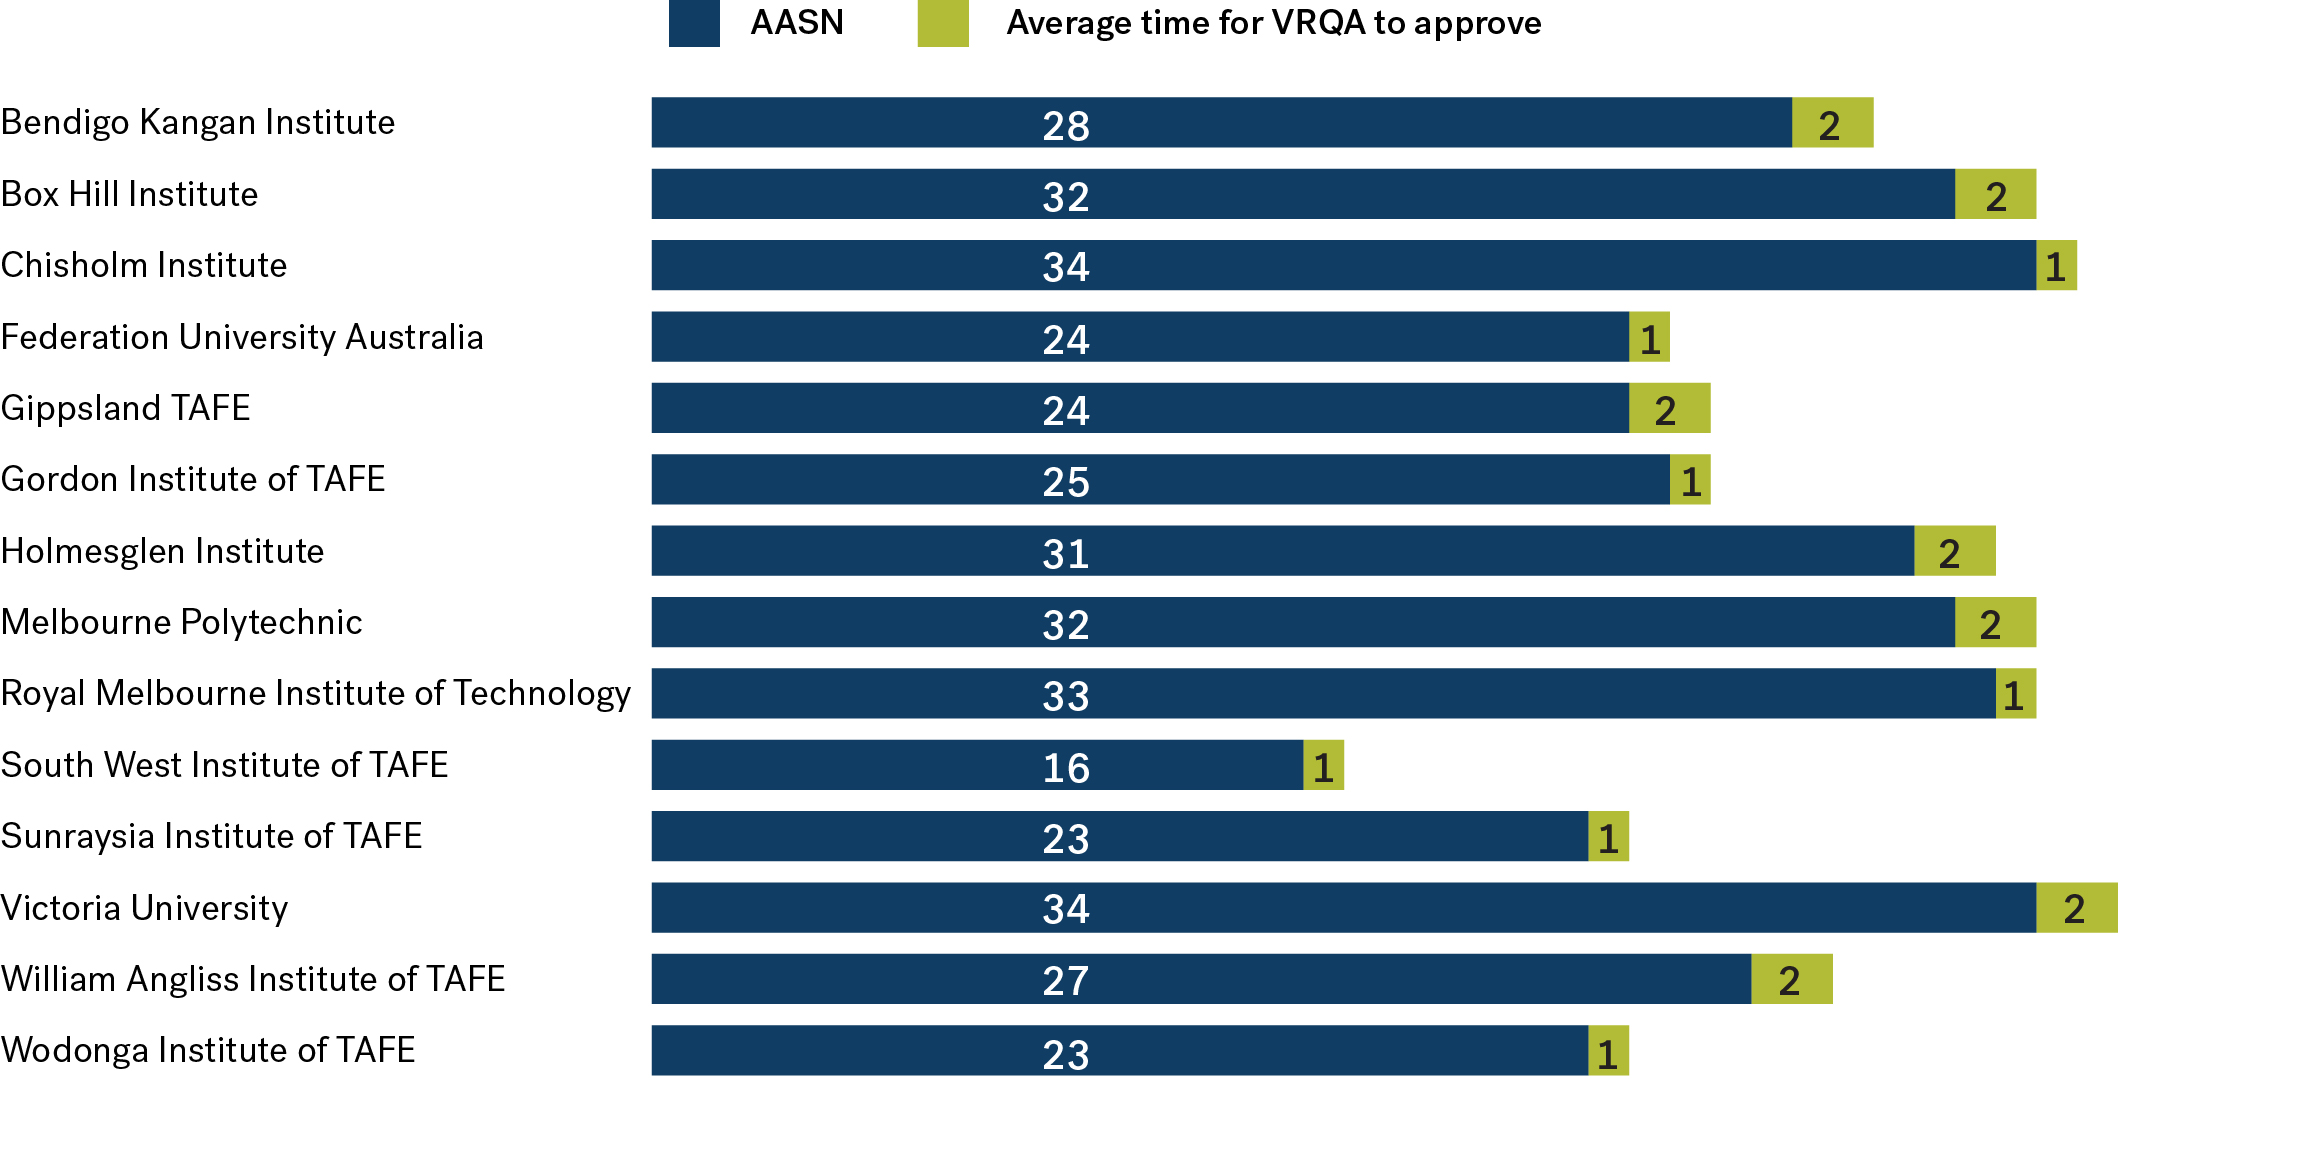 First quarter 2023 processing times, graph comparing AASN and VRQA contract processing times